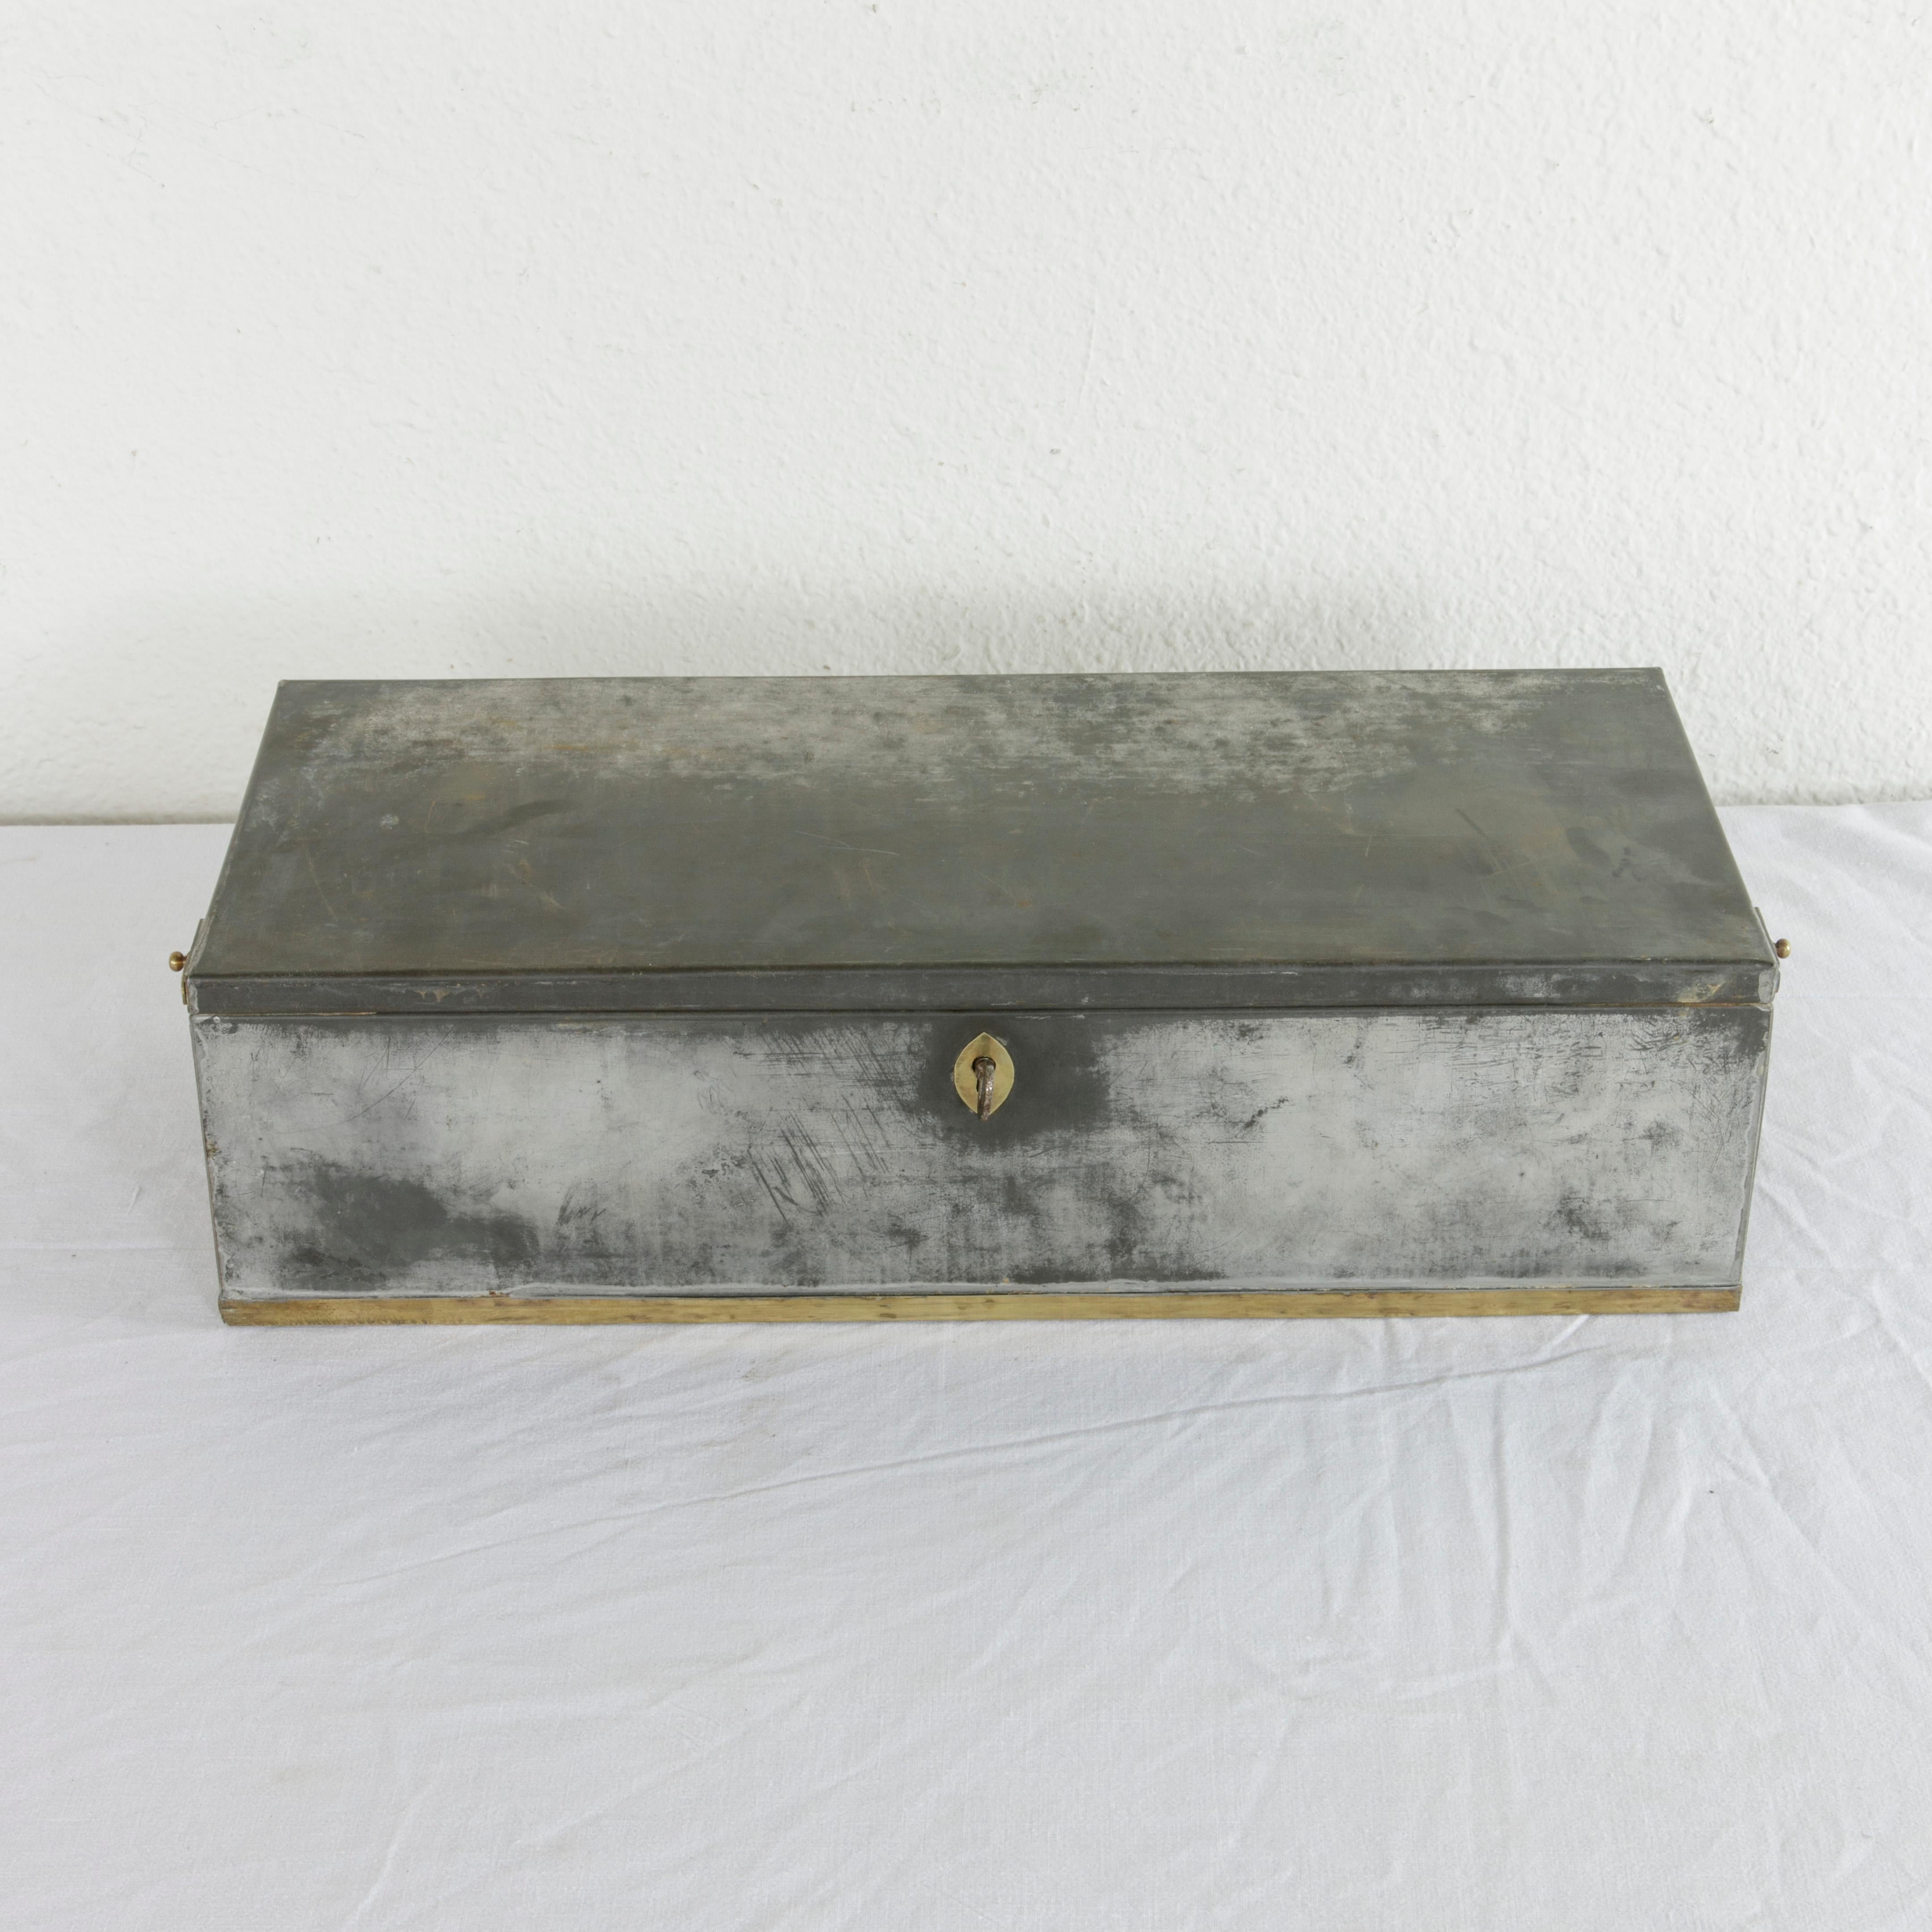 This early 20th century steel lock box or safety deposit box from the Banco Central of Barcelona in Spain features its original brass handles, trim, and key entry. The hand-painted number 664 is on one side, and the box includes its two original